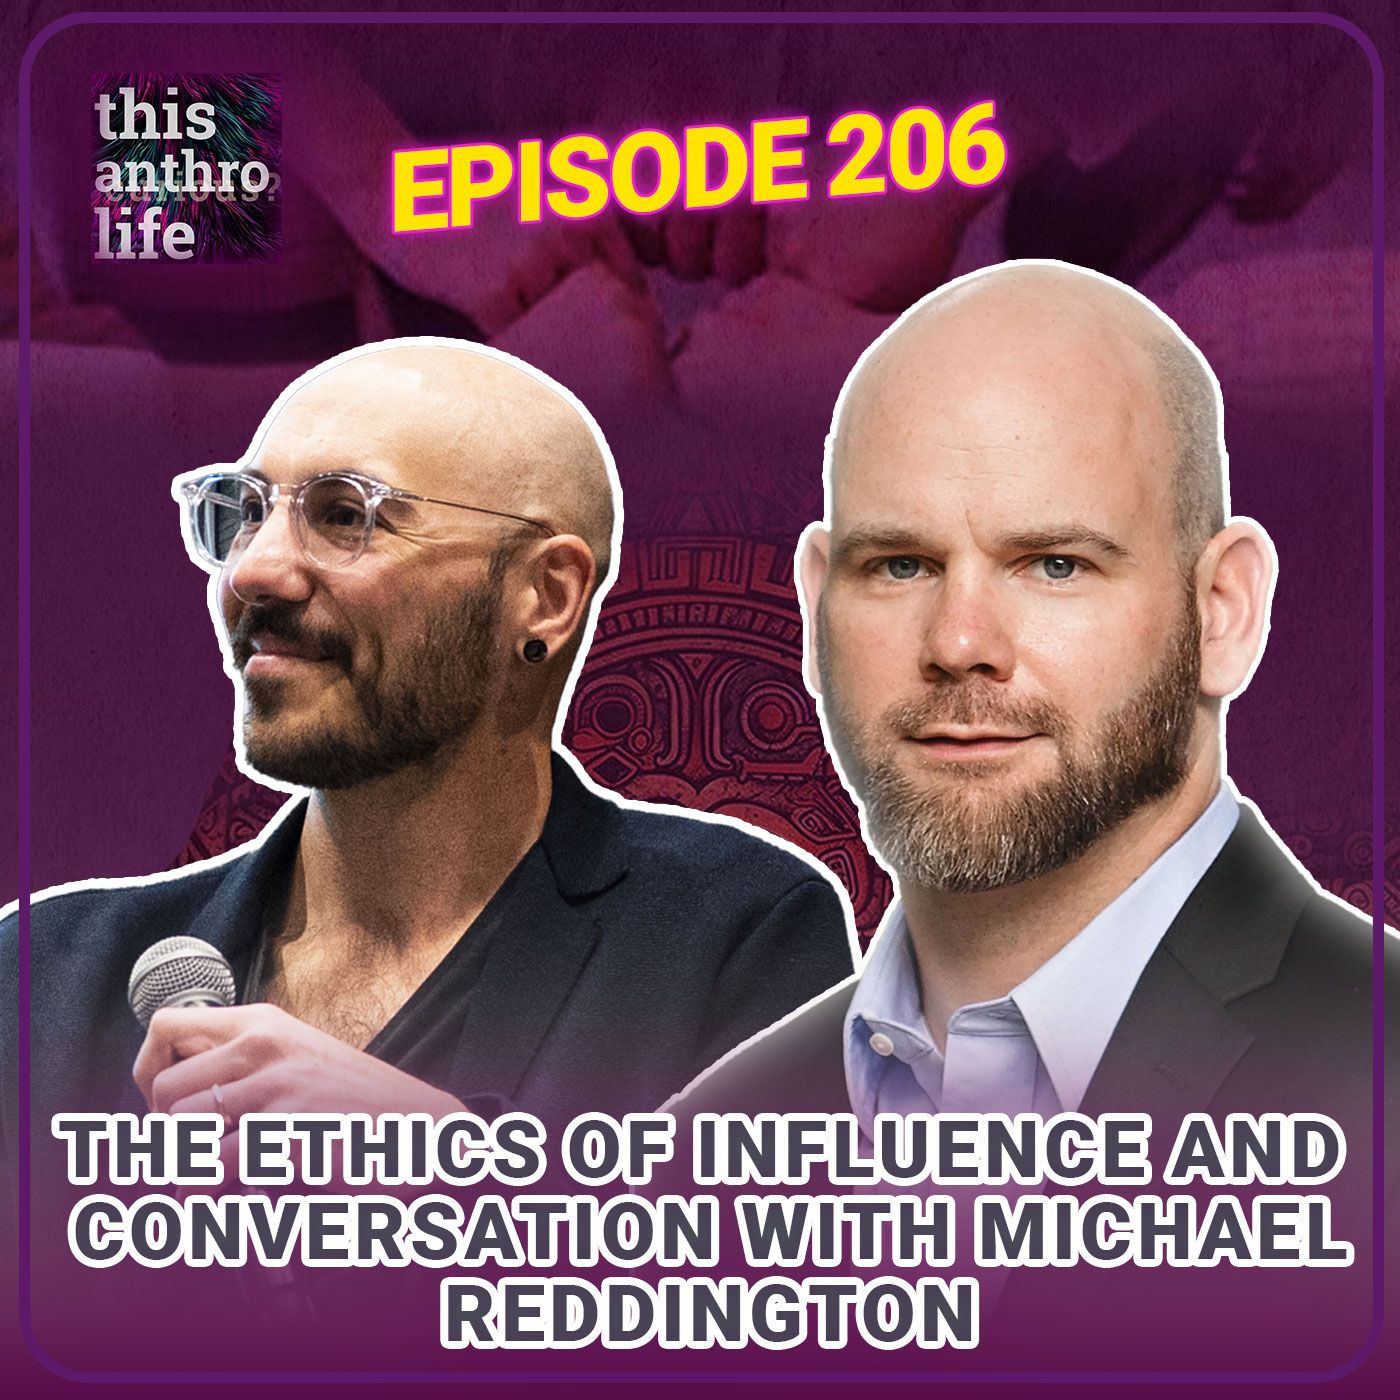 The Ethics of Influence and Conversation with Michael Reddington